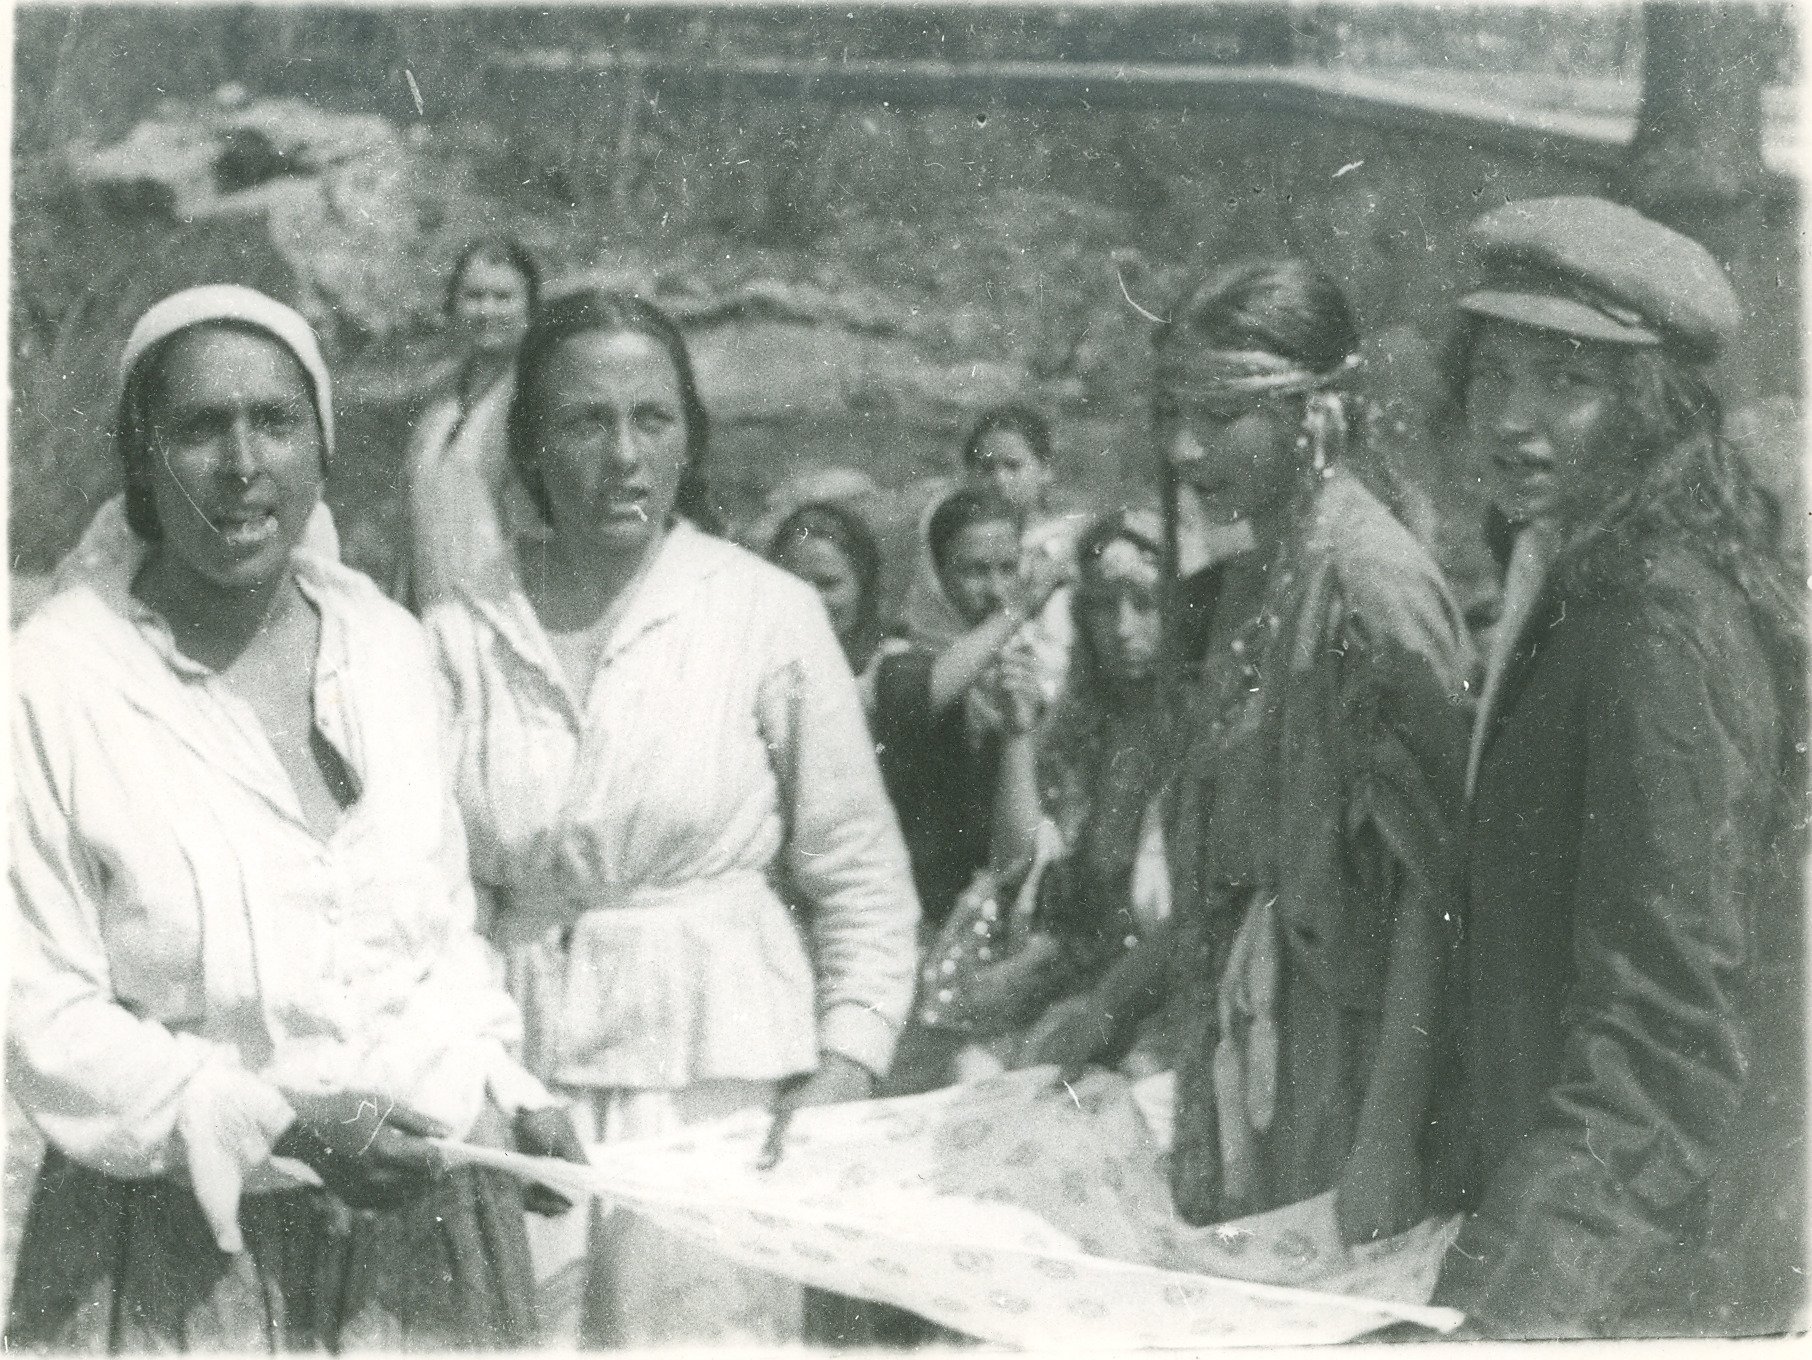  The National Archives, Romania, The ritual performed in motion by Roma women, dancing and singing according to the tradition, on Lazarus Saturday, so called ”Lazarea” in Romanian (1940 c), ref. RO-BU-F-01073-2-3072-1 